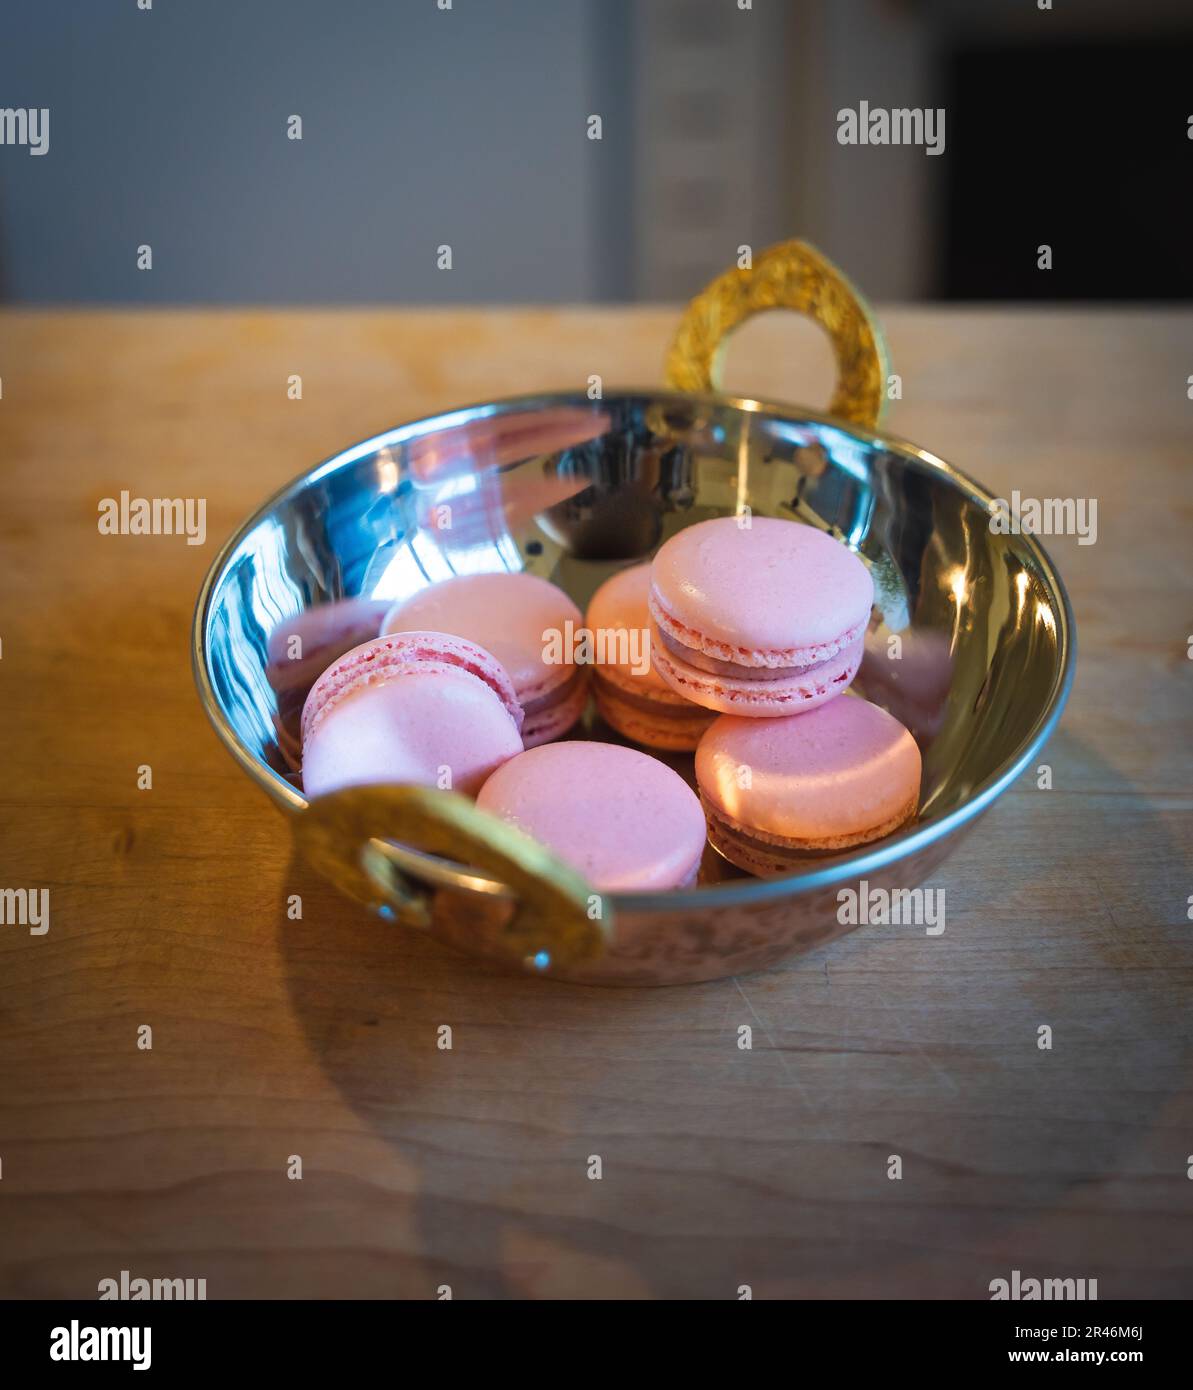 Pink macaroons on a golden plate Stock Photo